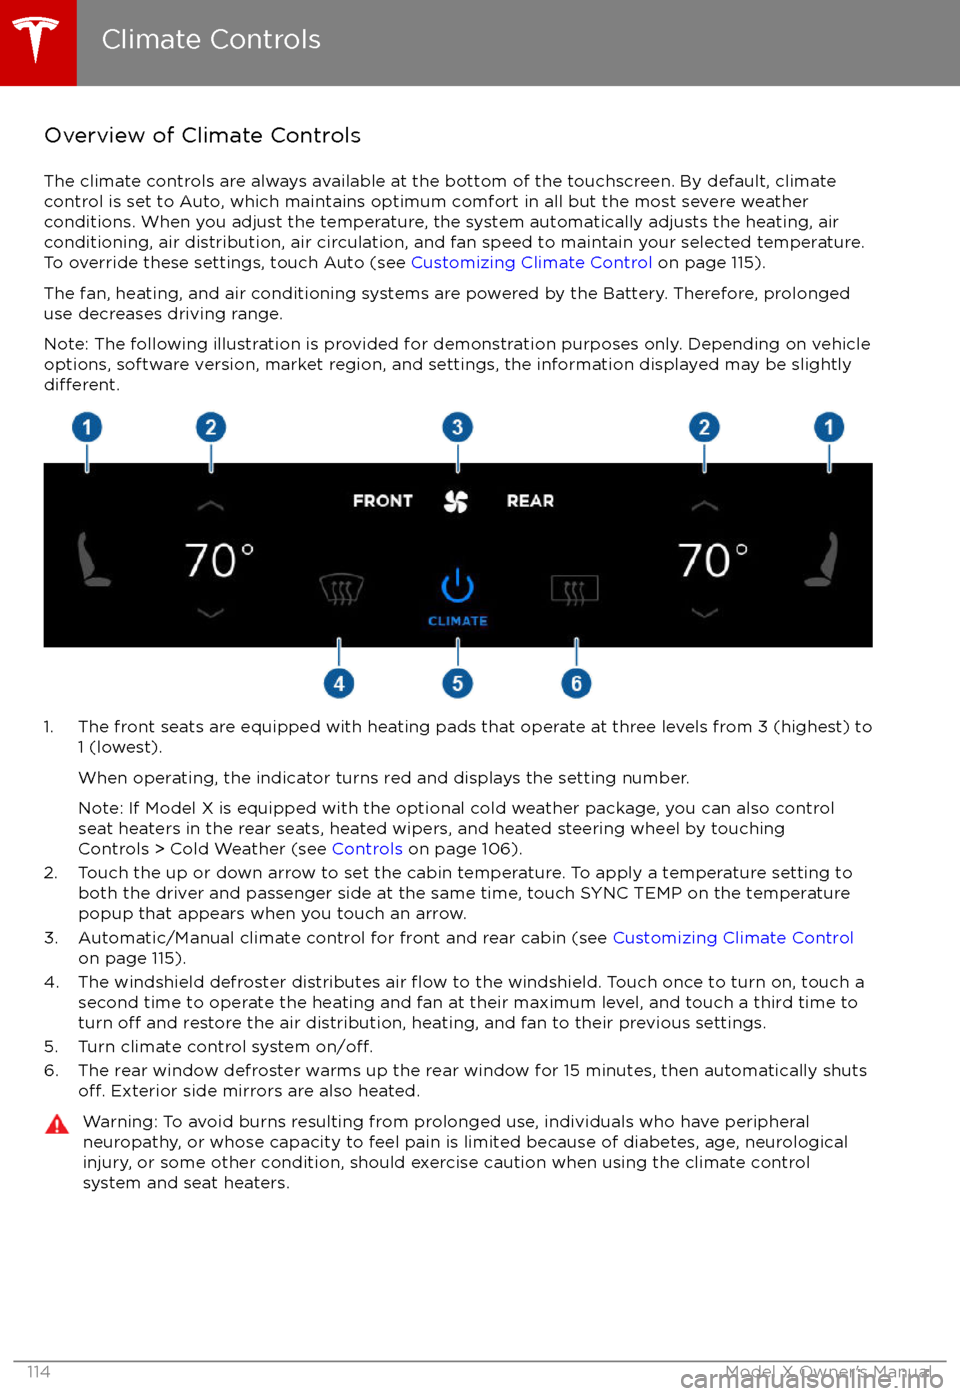 TESLA MODEL X 2017  Owners Manual  Overview of Climate Controls
The climate controls are always available at the bottom of the touchscreen. By default, climate control is set to Auto, which maintains optimum comfort in all but the most